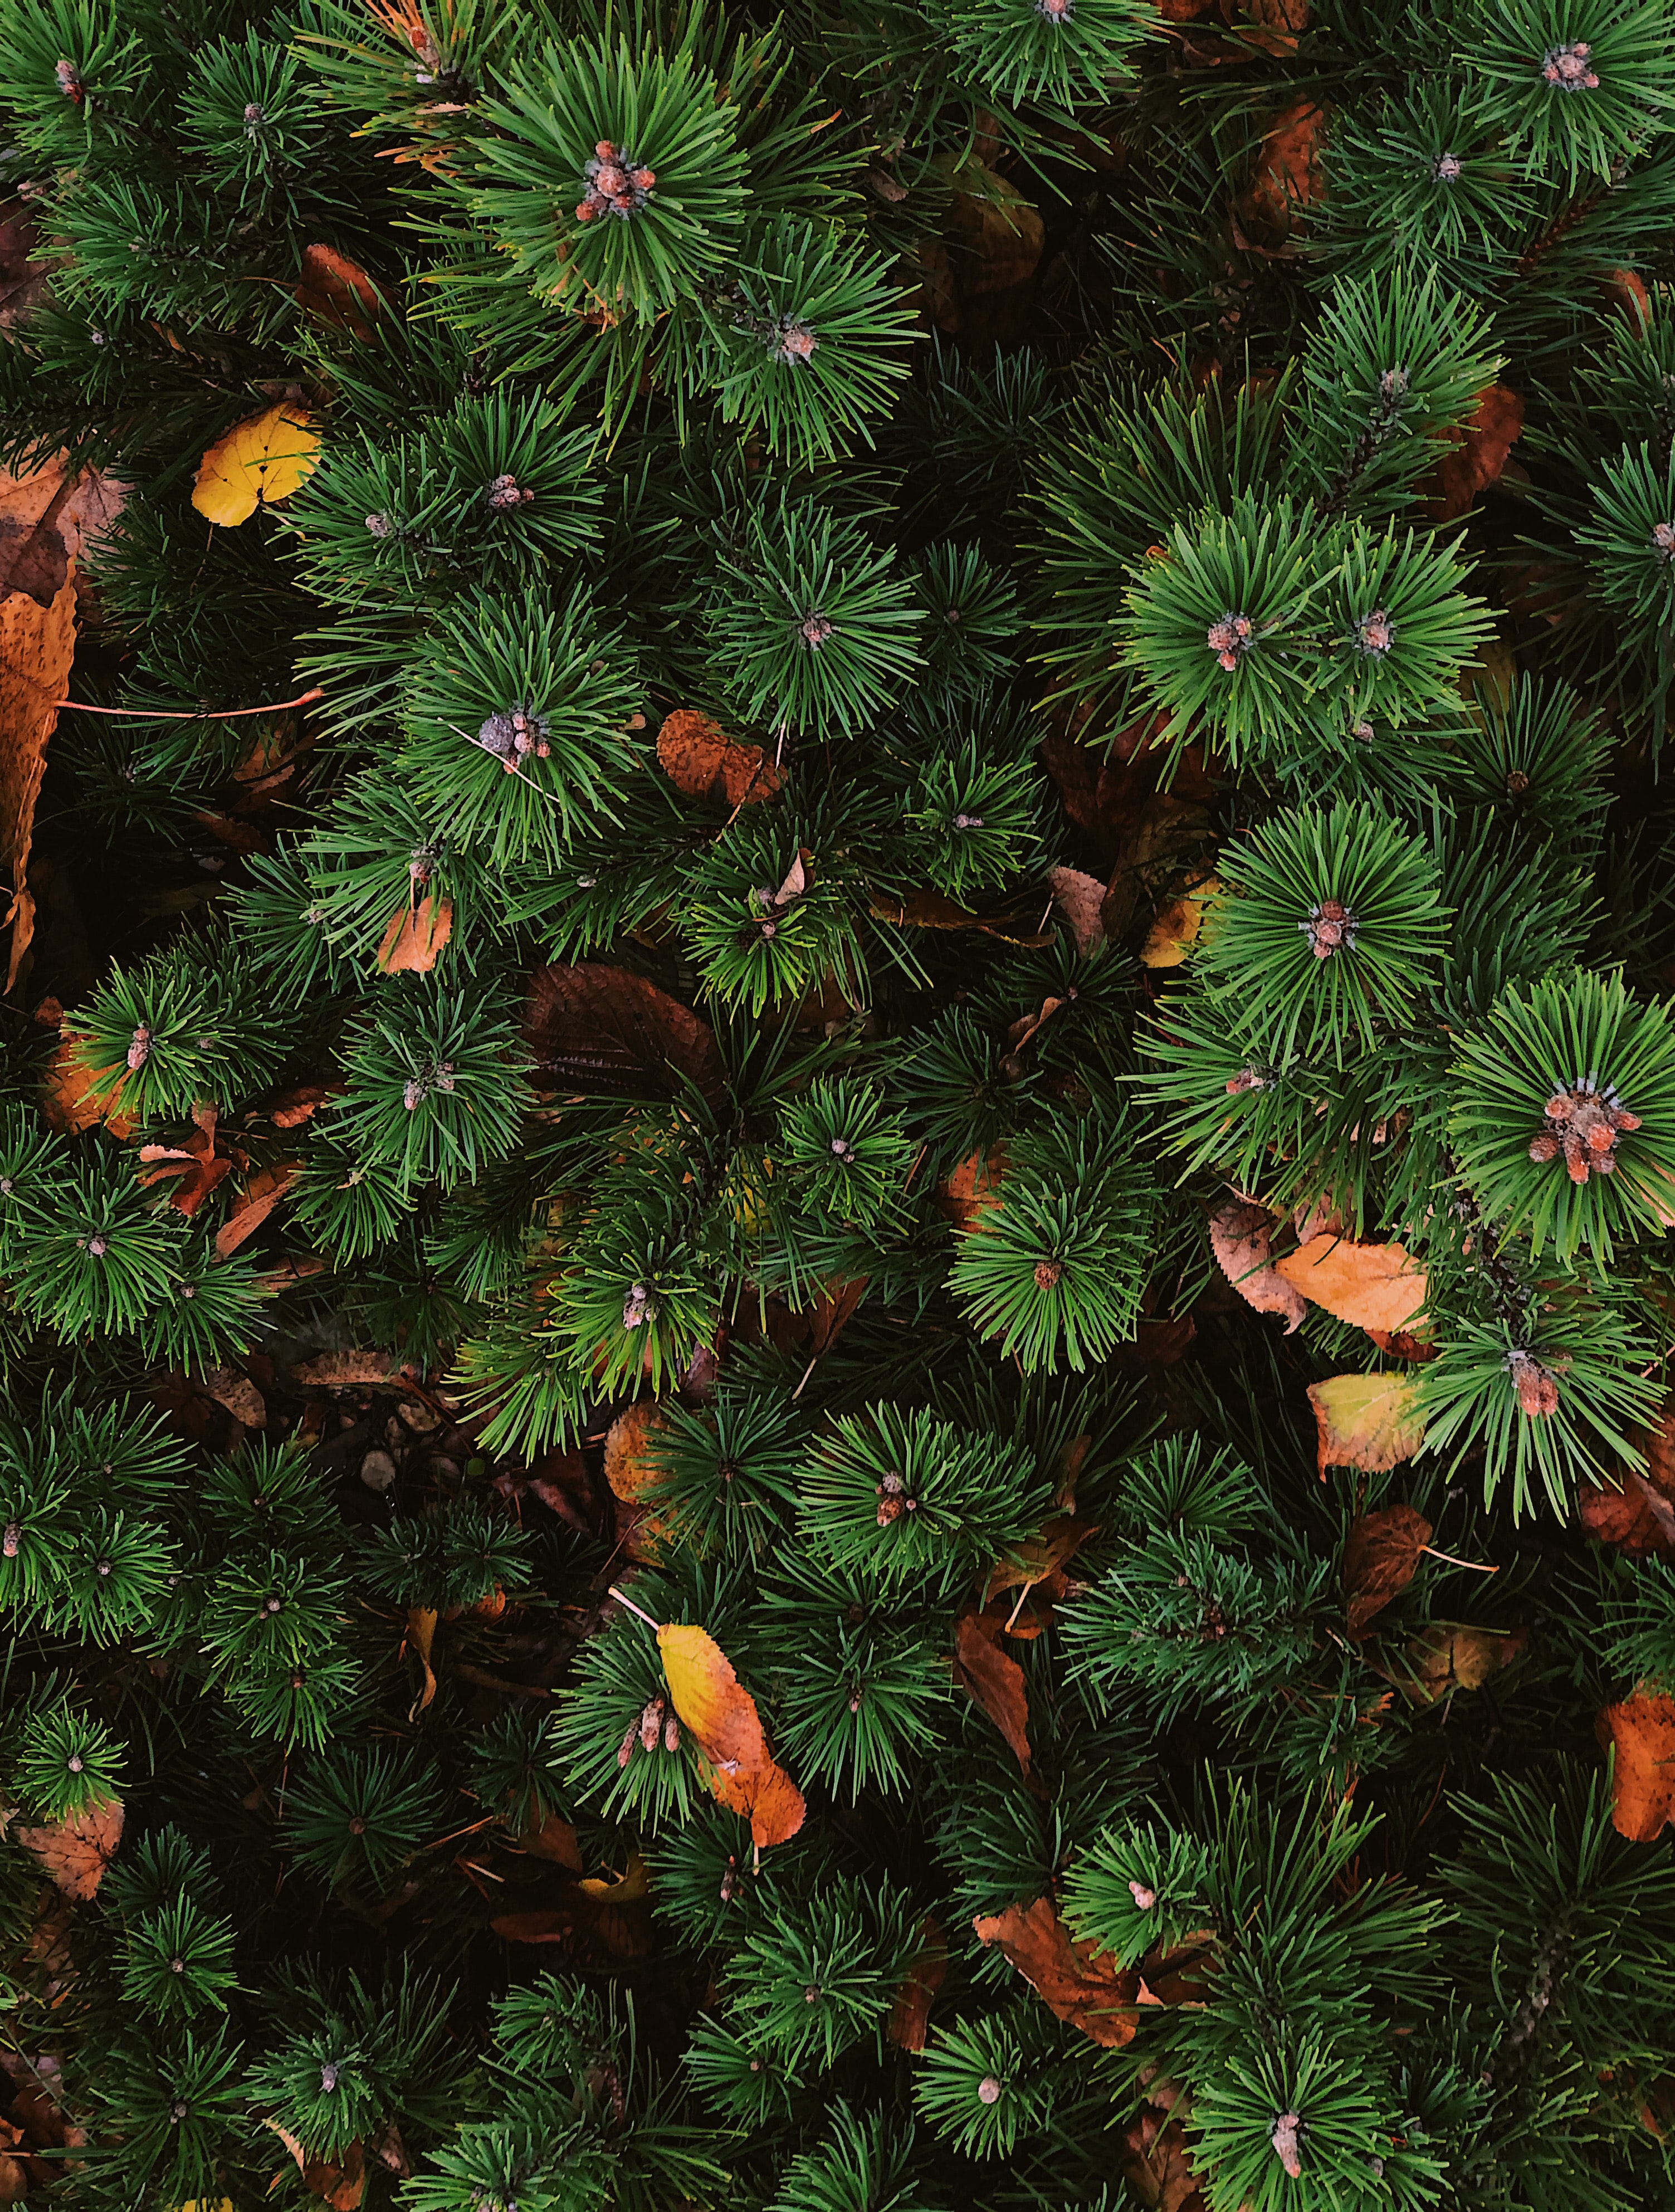 view from above, nature, needle, plant, spruce, fir